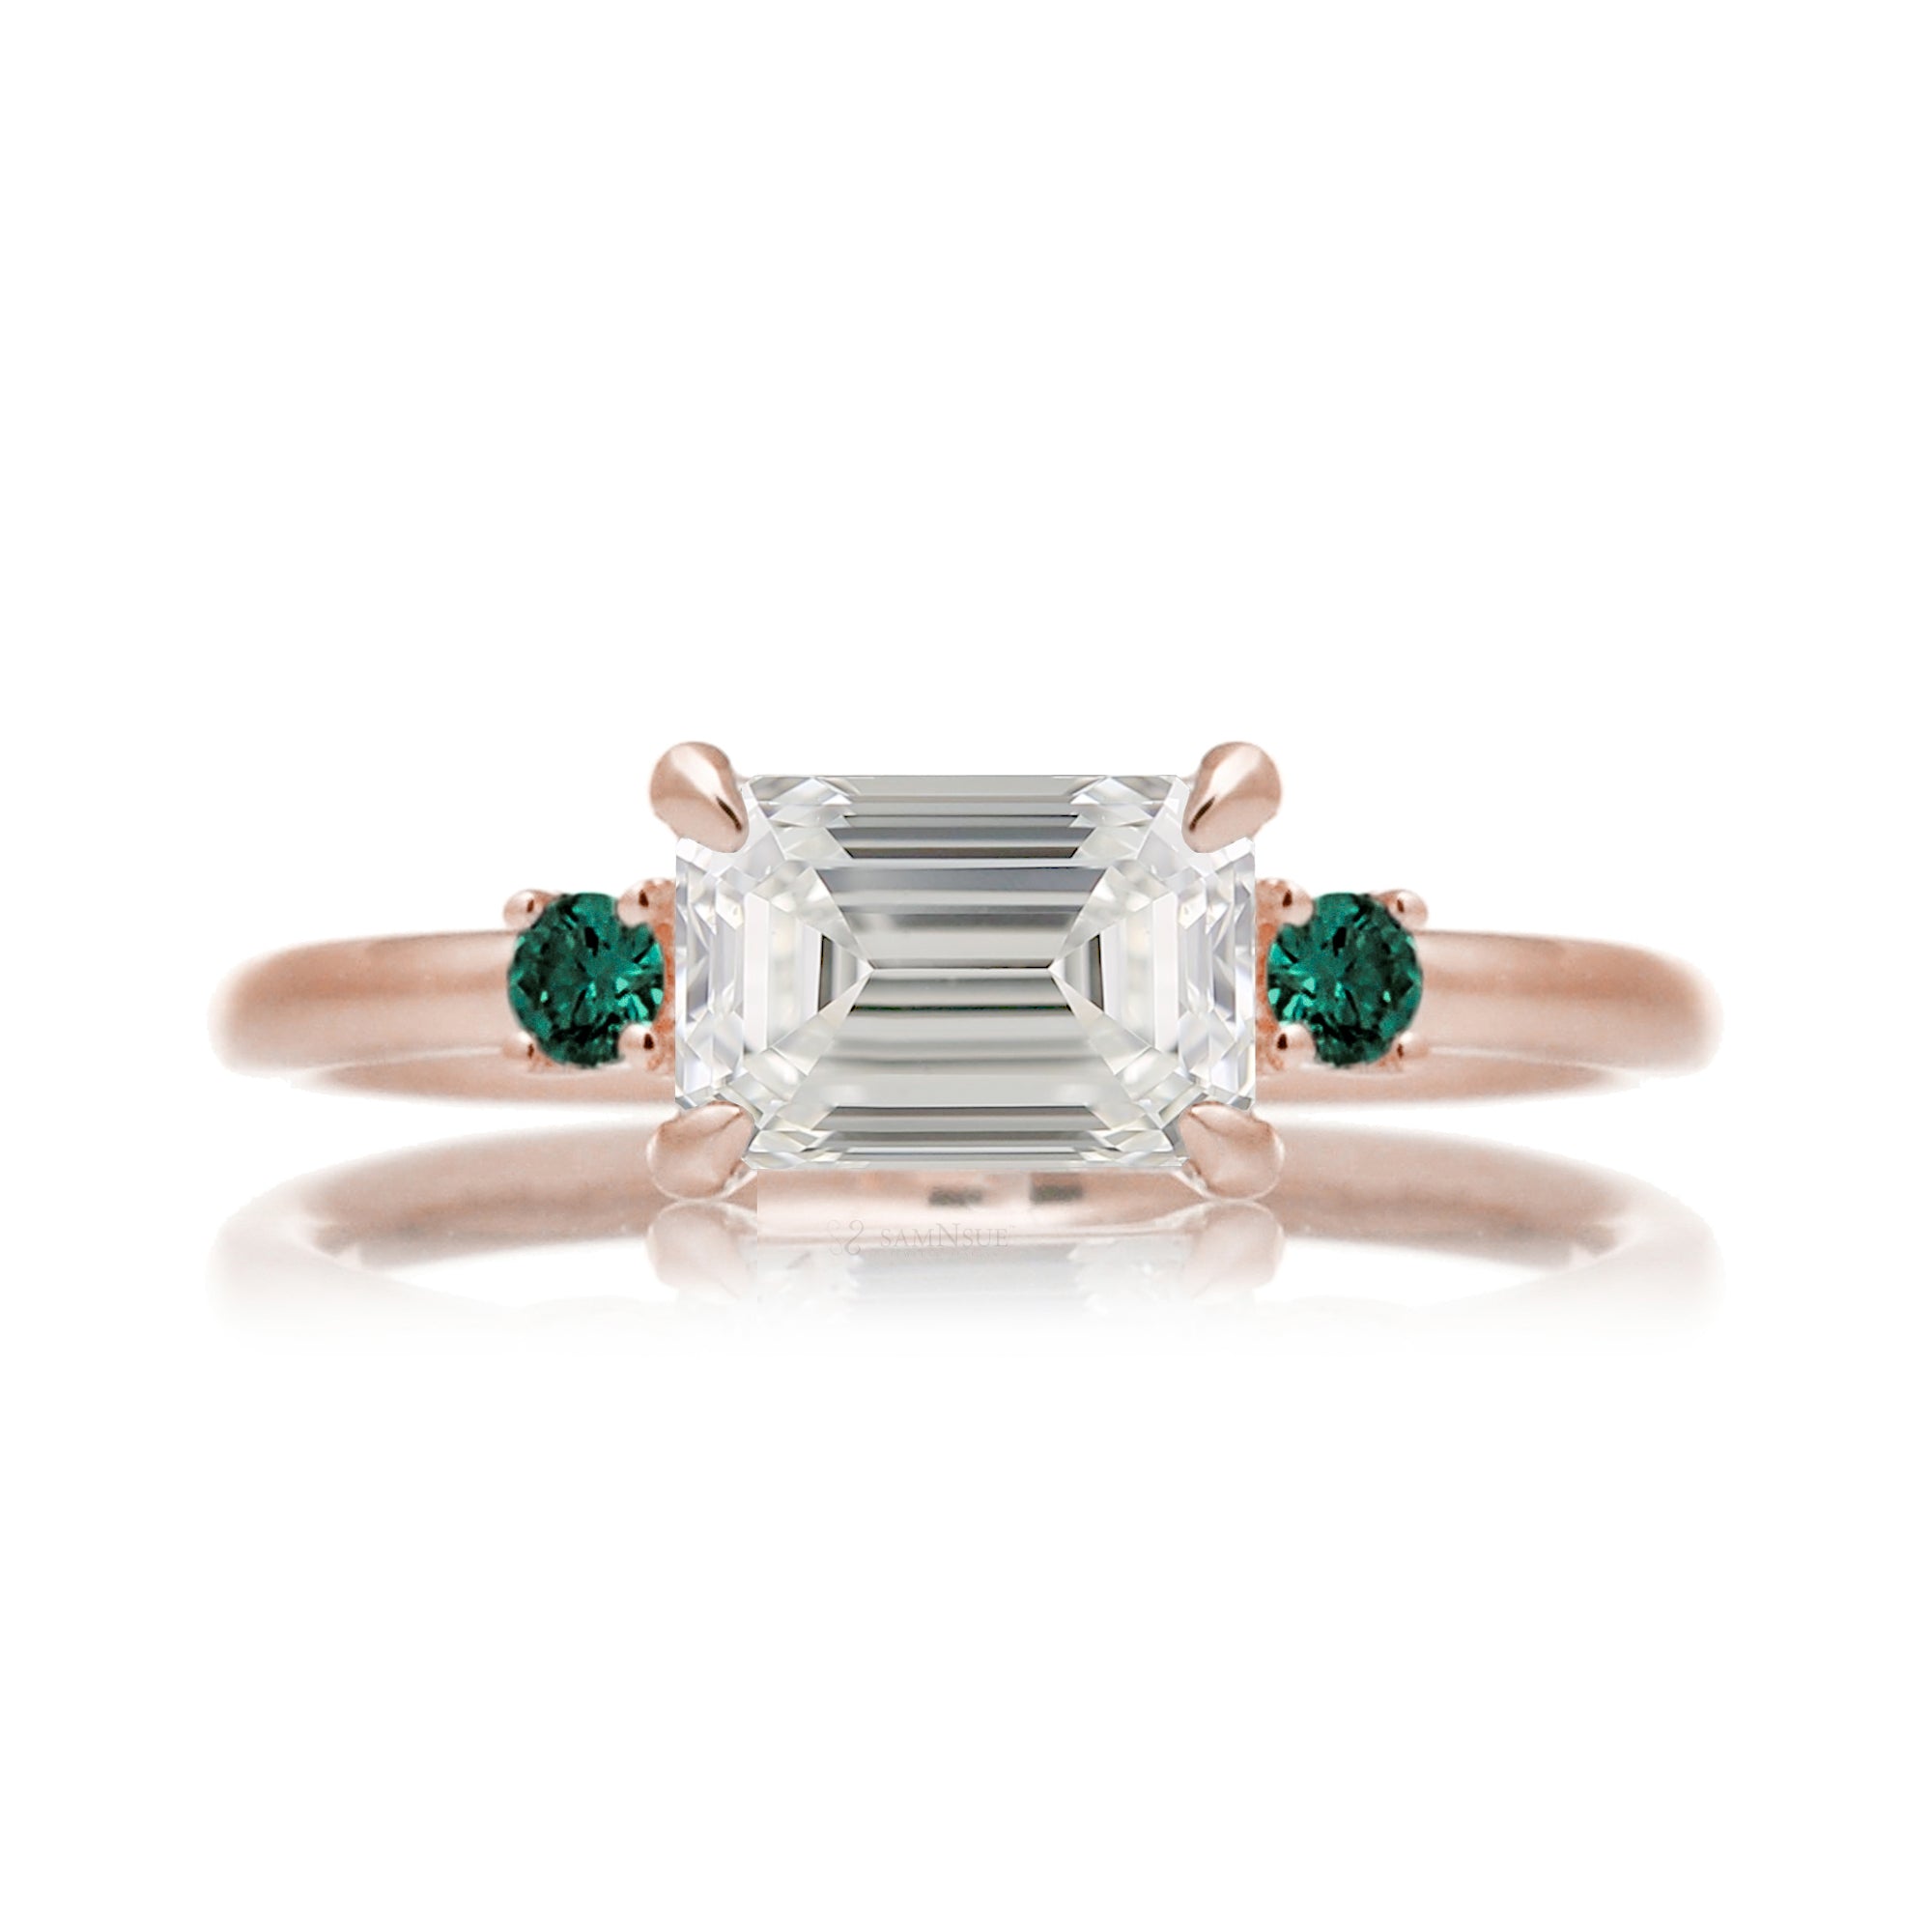 east-west emerald cut diamond three stone ring the Lena with side green emeralds rose gold